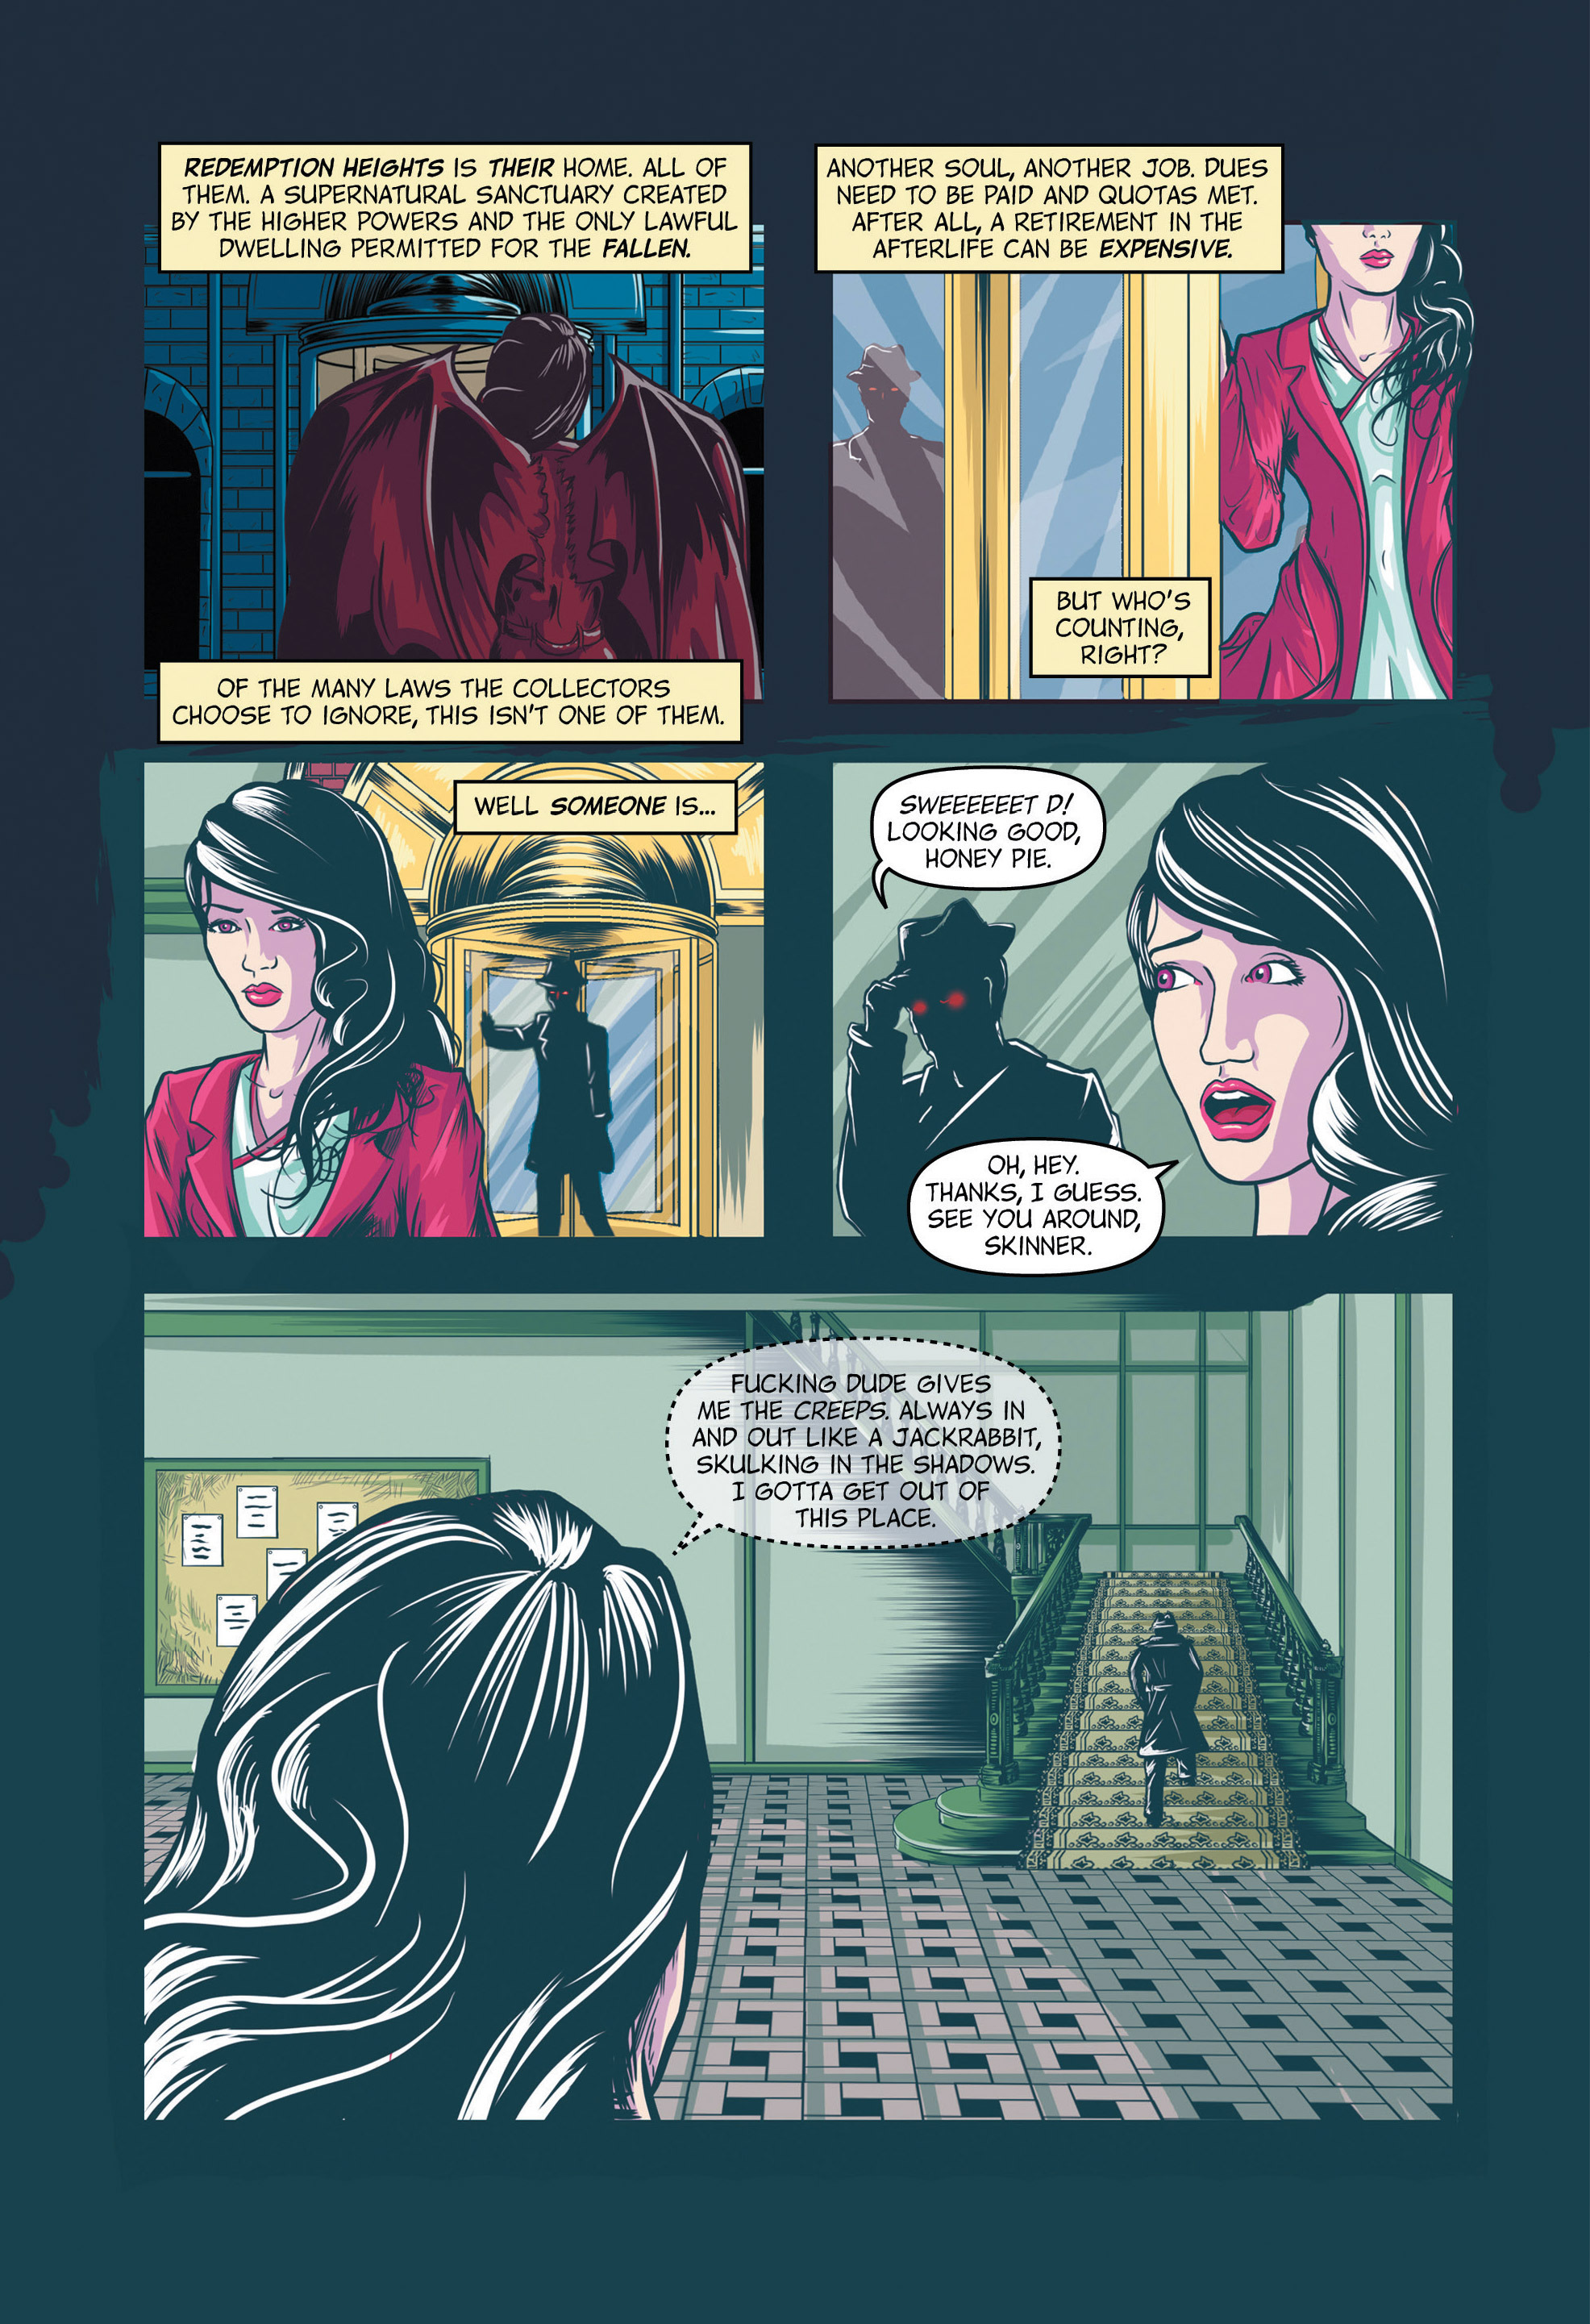 Read online Redemption Heights comic -  Issue # Full - 9